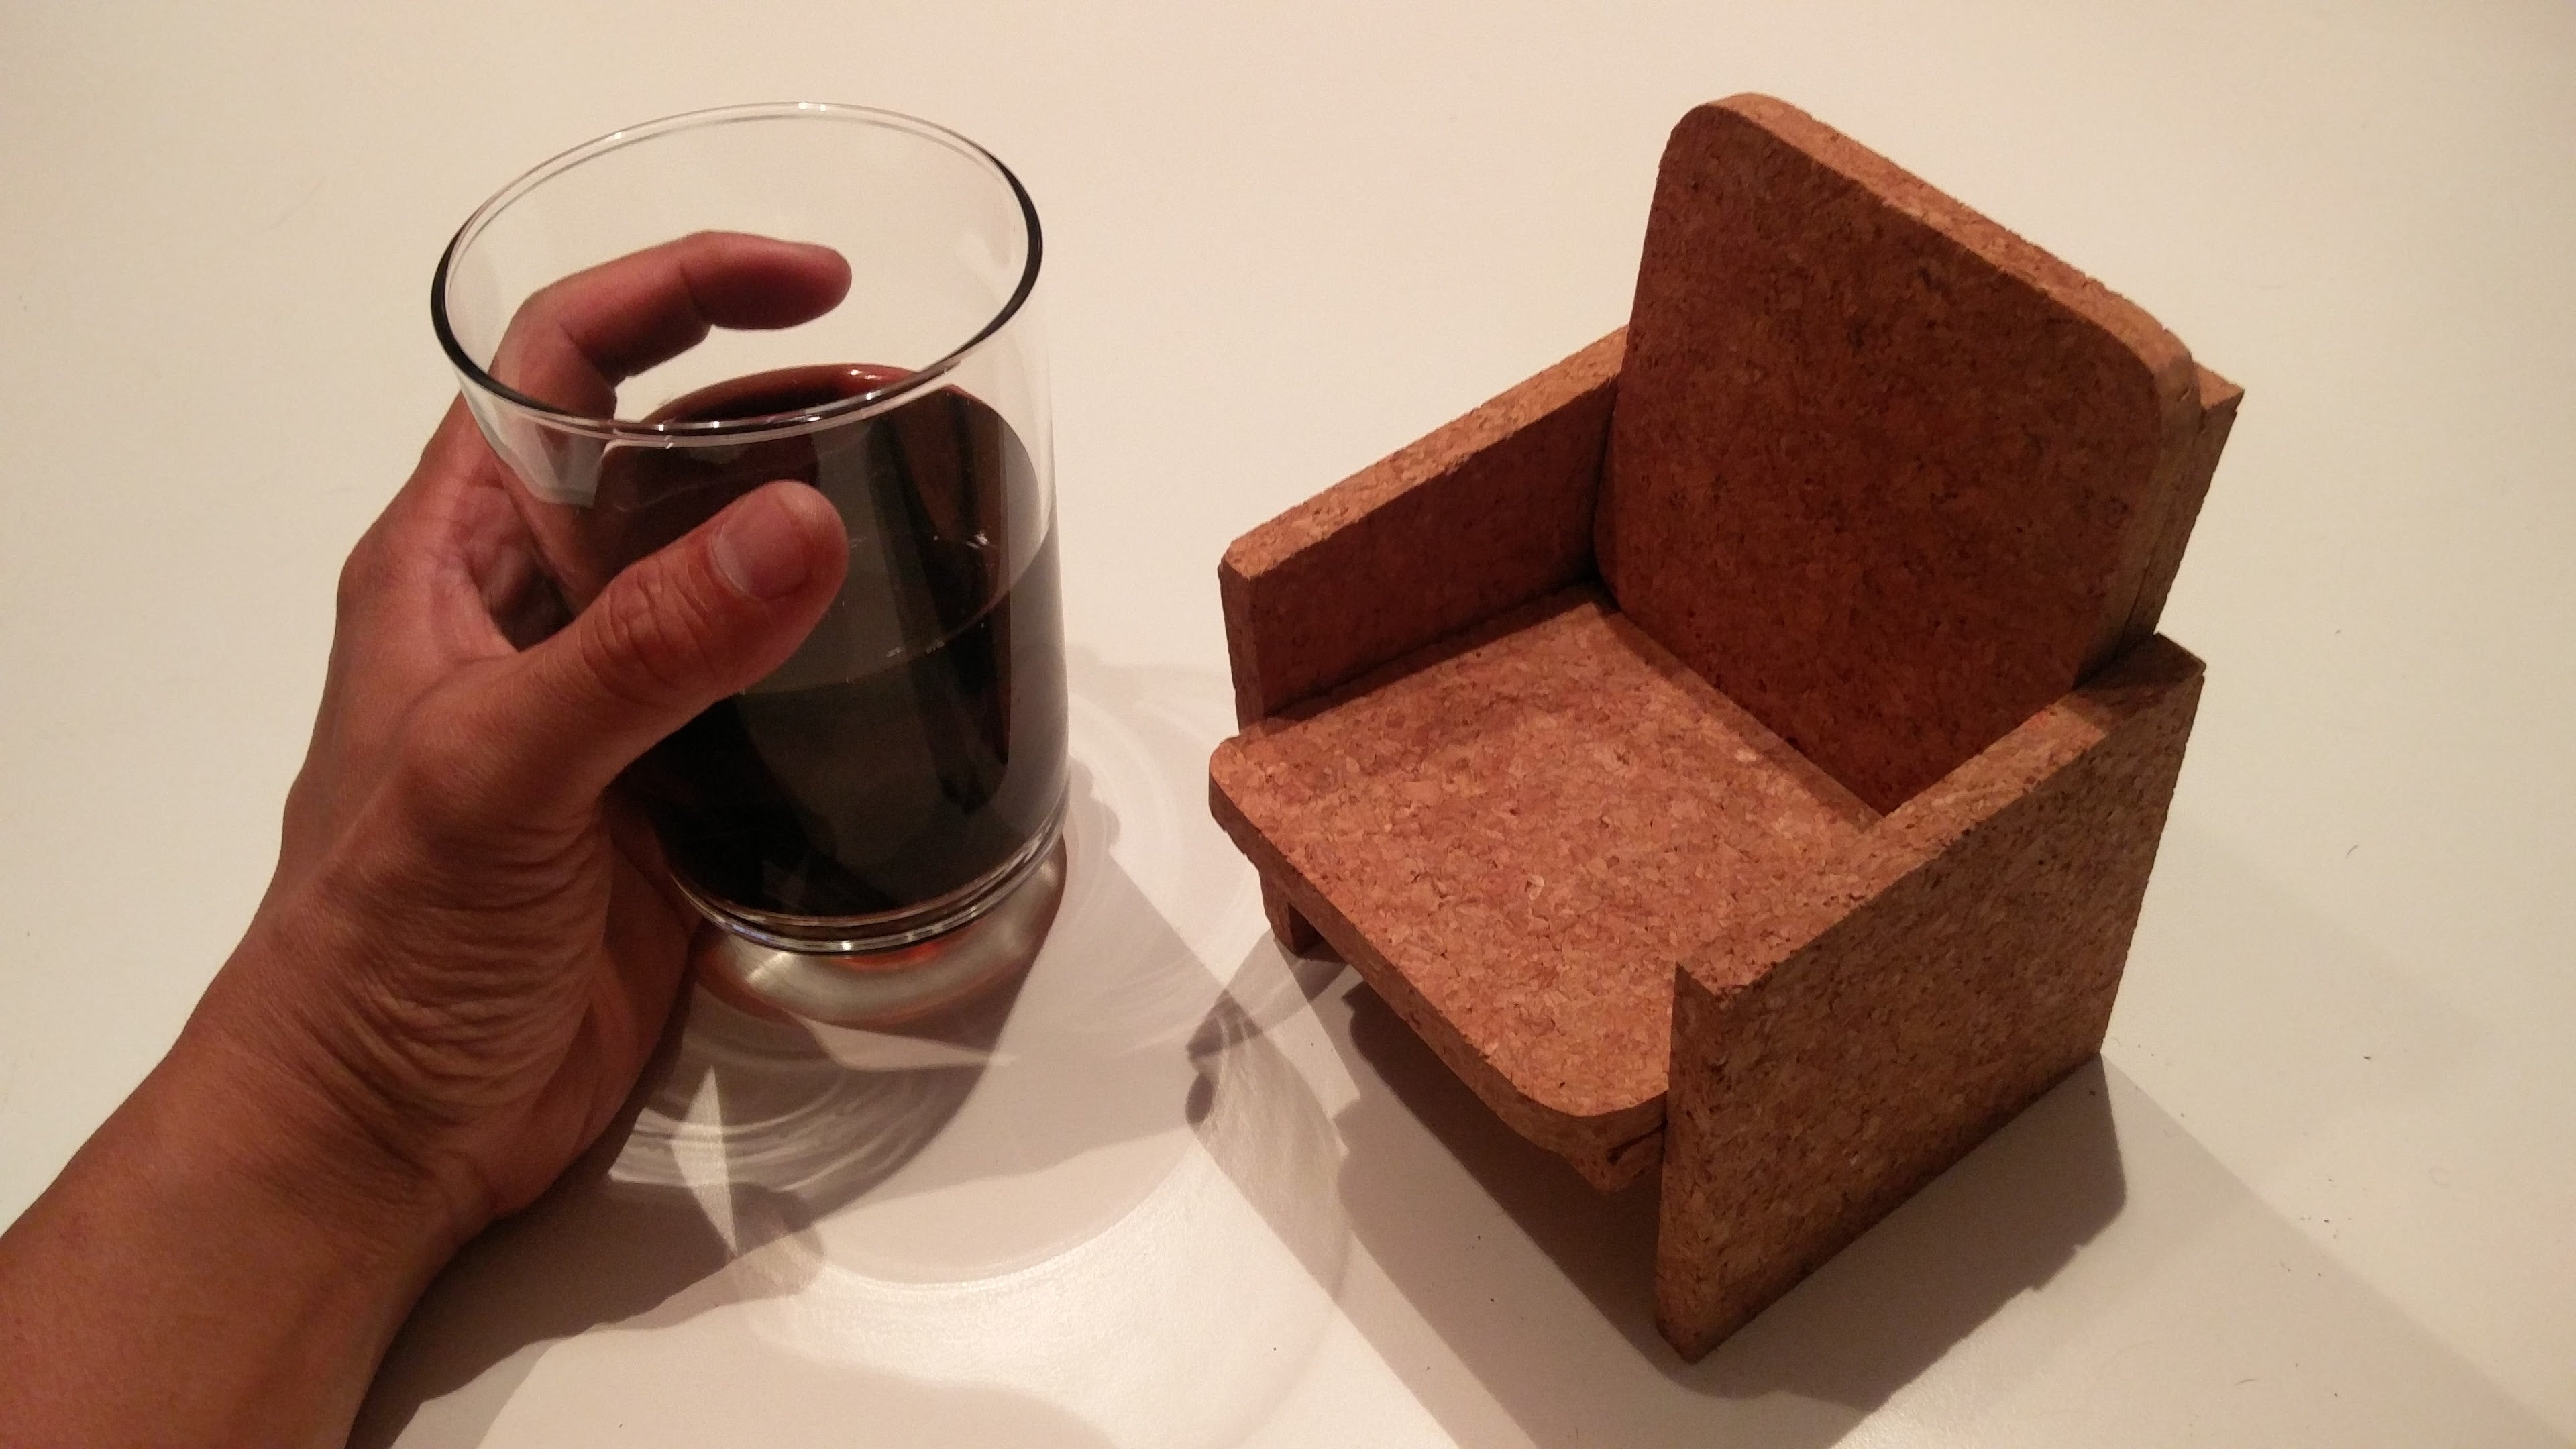 Magnetically Assembled Cork Coaster Mini-Chair